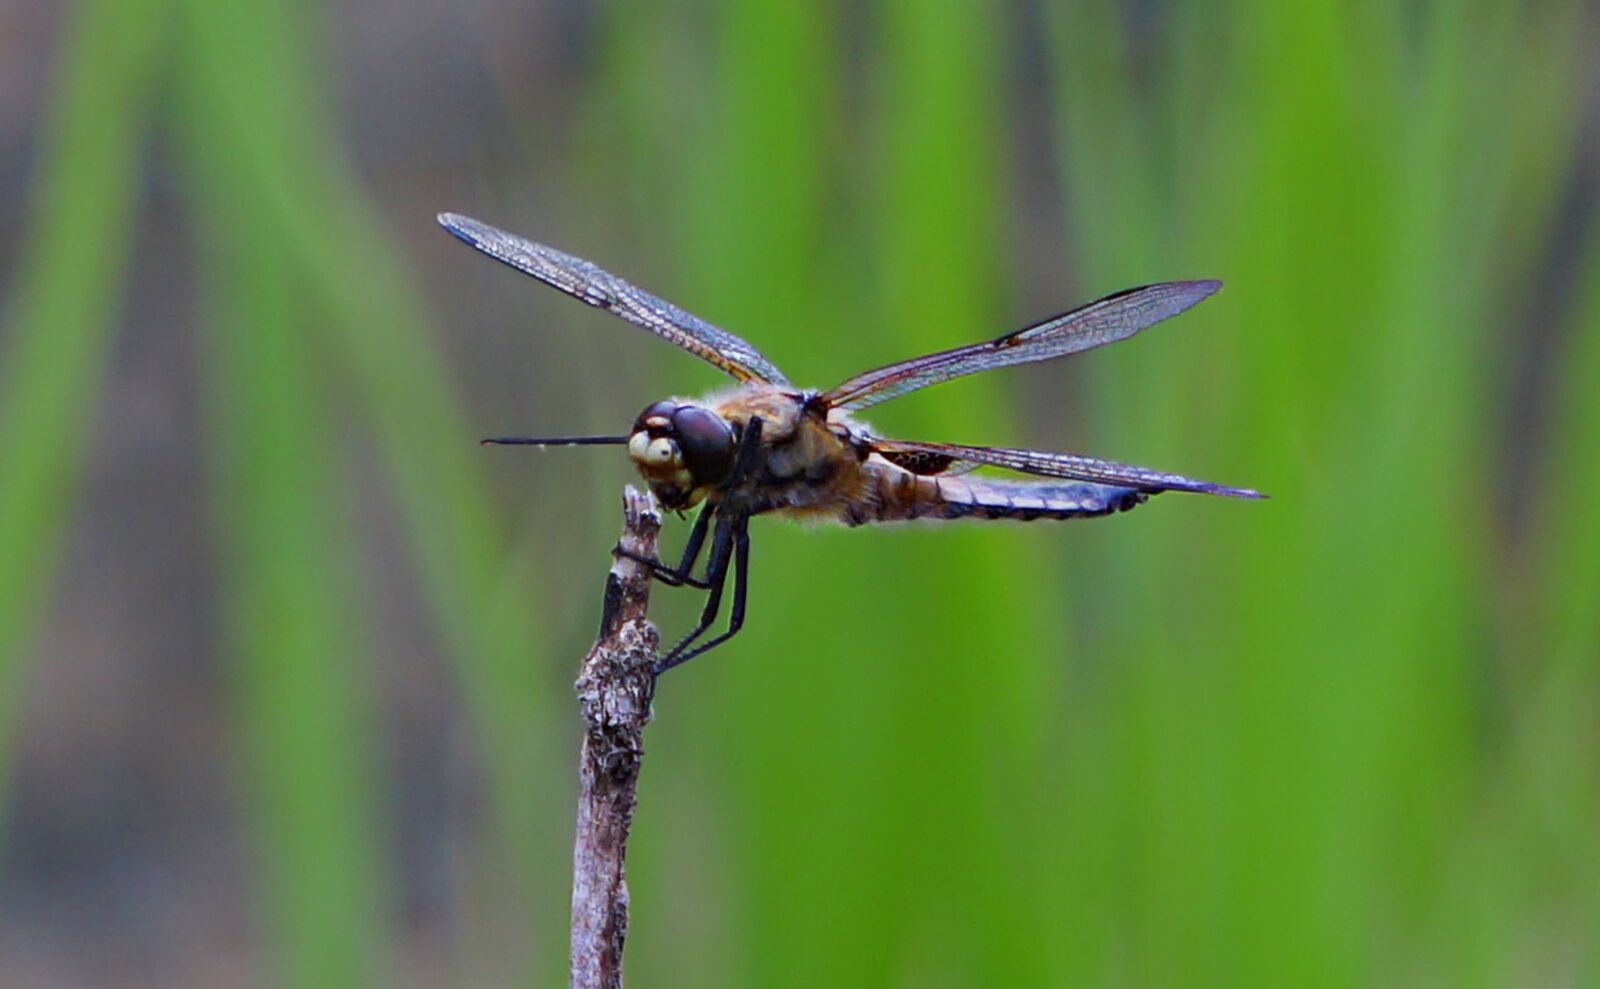 Sony a6000 sample photo. Dragonfly, animal, nature photography